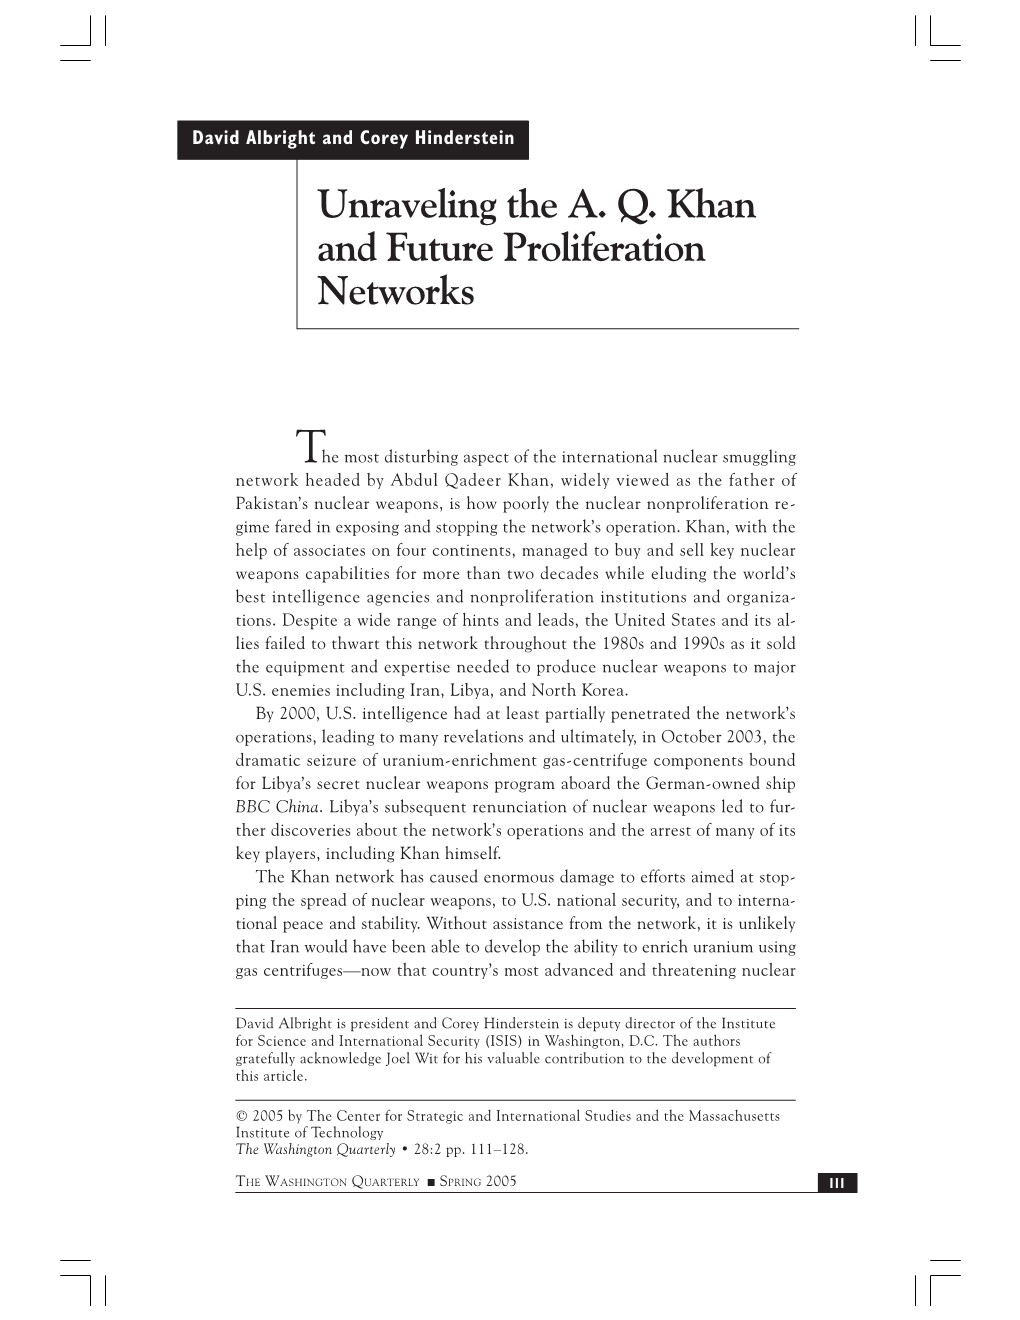 Unraveling the A. Q. Khan and Future Proliferation Networks